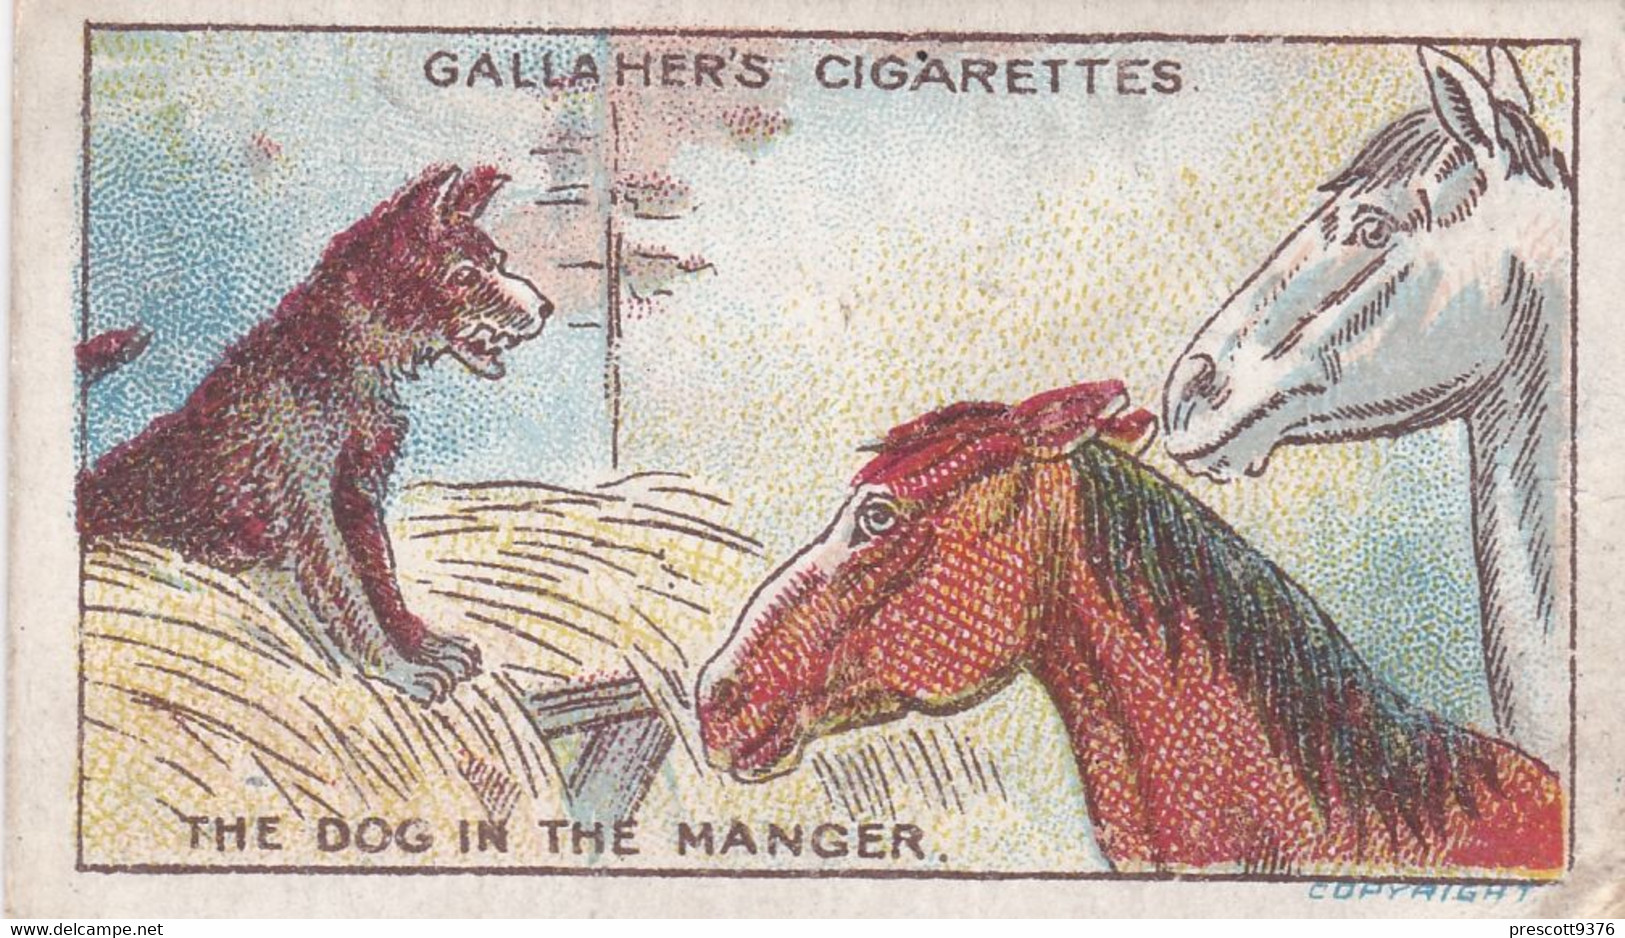 67 Dog In The Manger, Fables & Their Morals 1922  - Gallaher Cigarette Card - Original - Antique - Gallaher